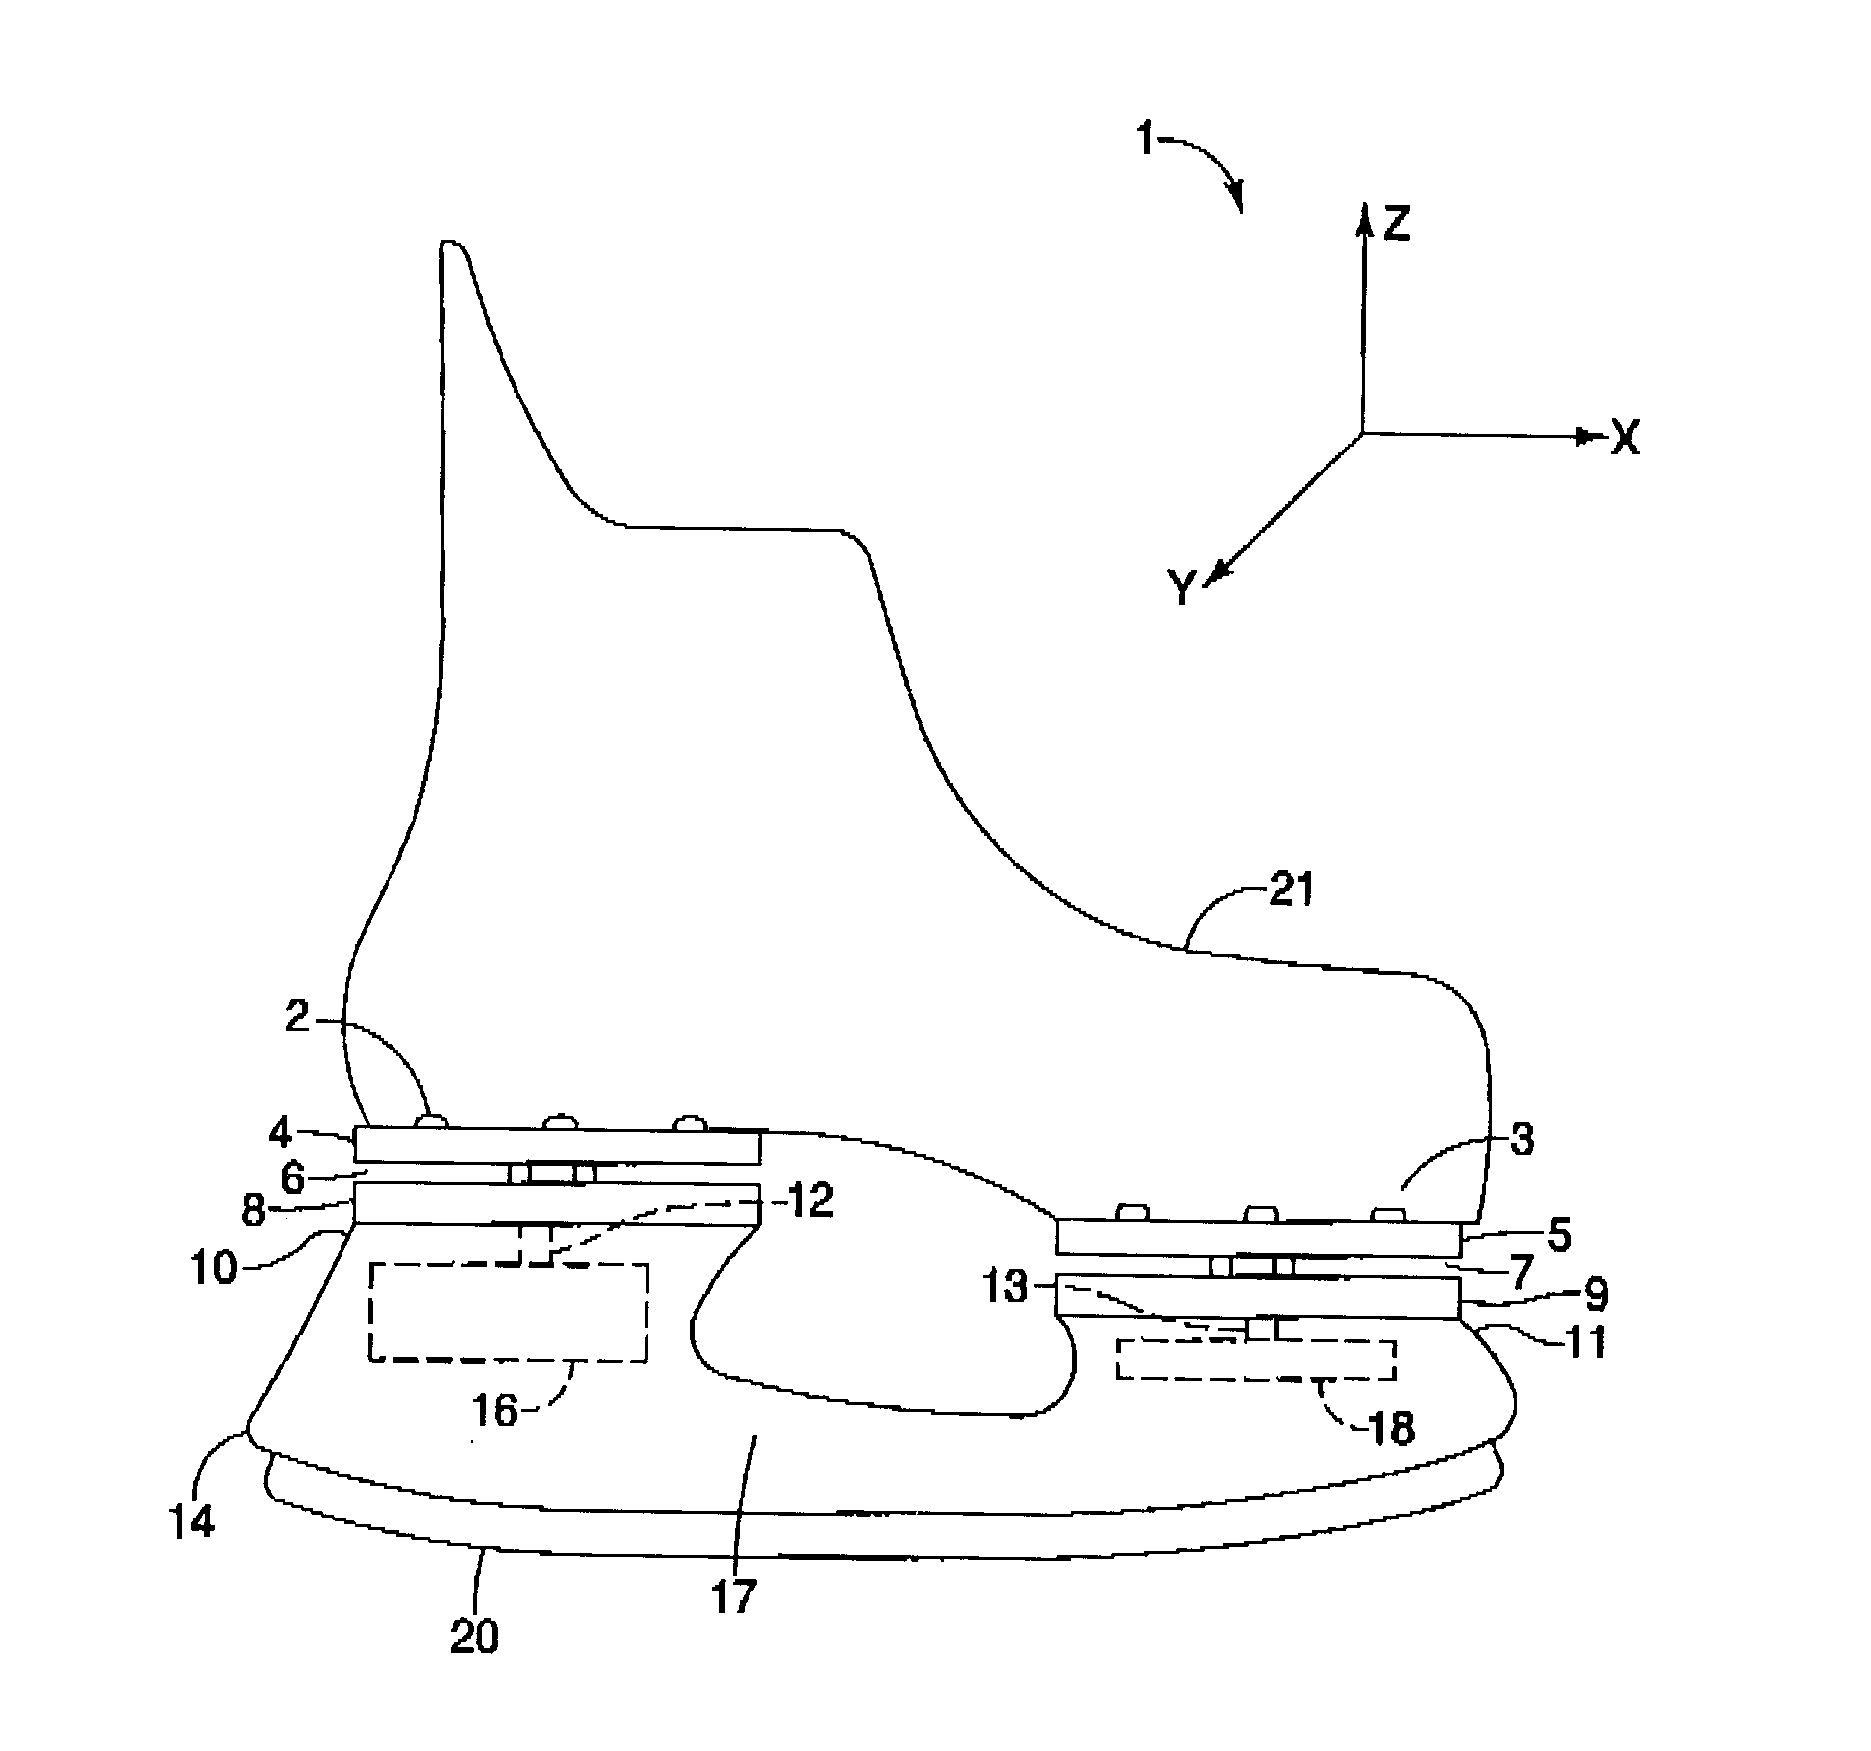 Performance monitoring systems and methods for edging sports